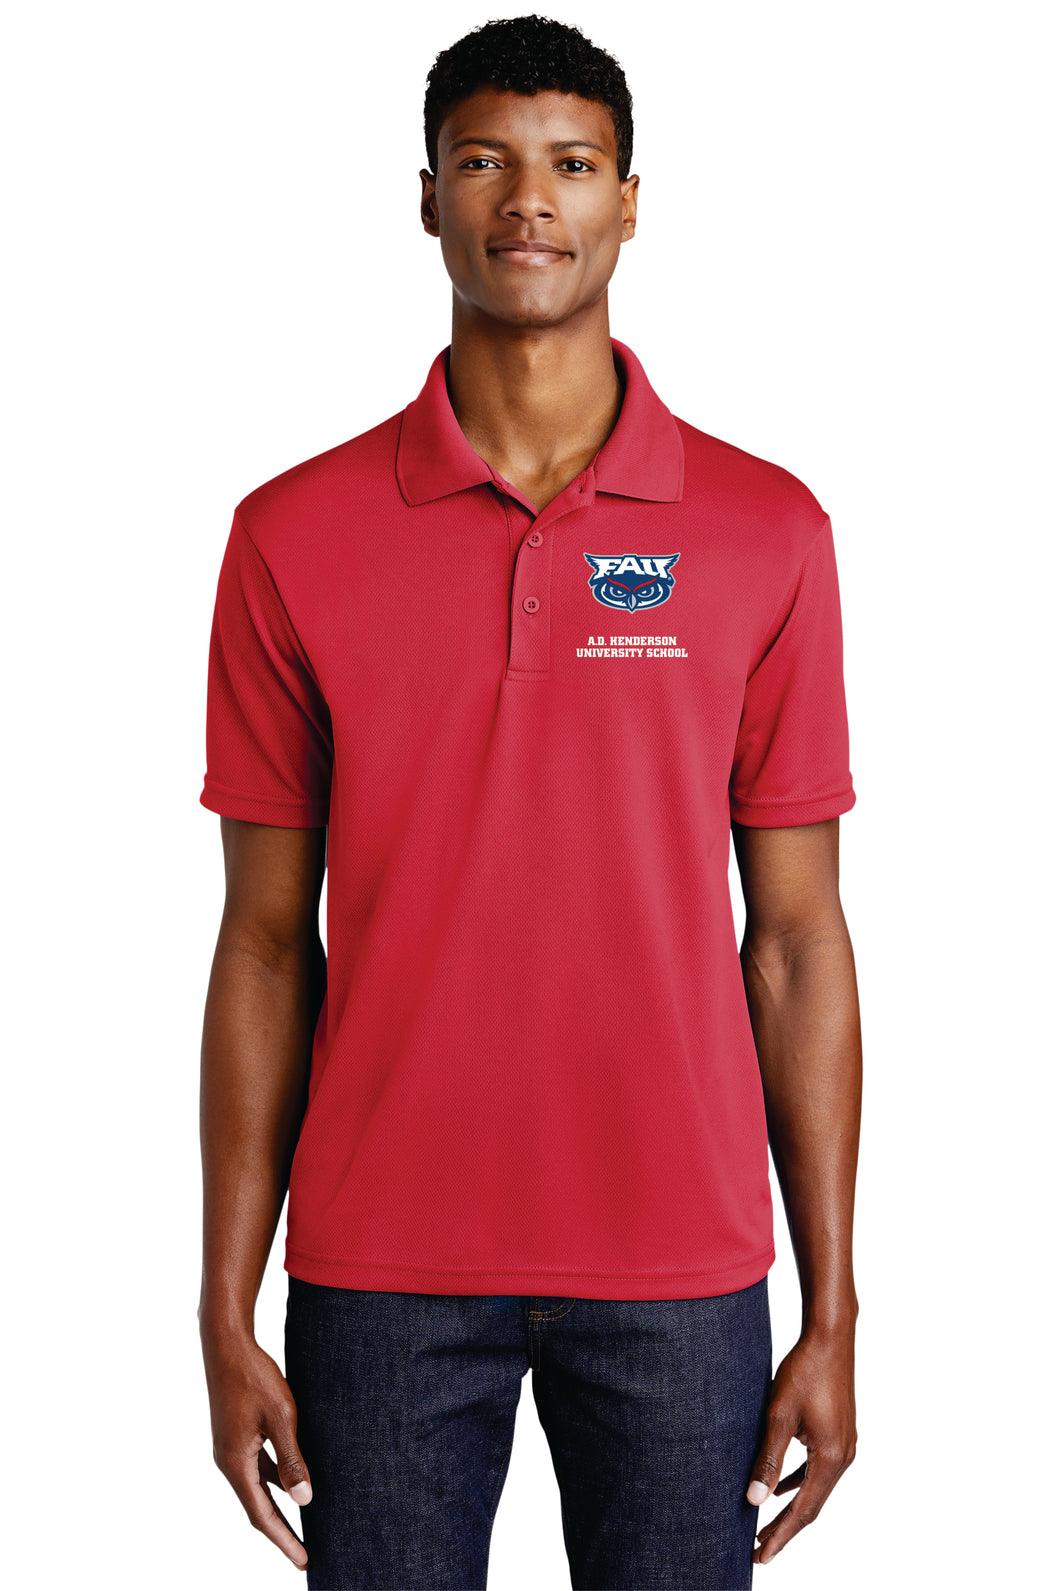 ST640 Adult Sport-Tek Moisture wicking 100% Polo 6th-8th Grade Embroider FAU